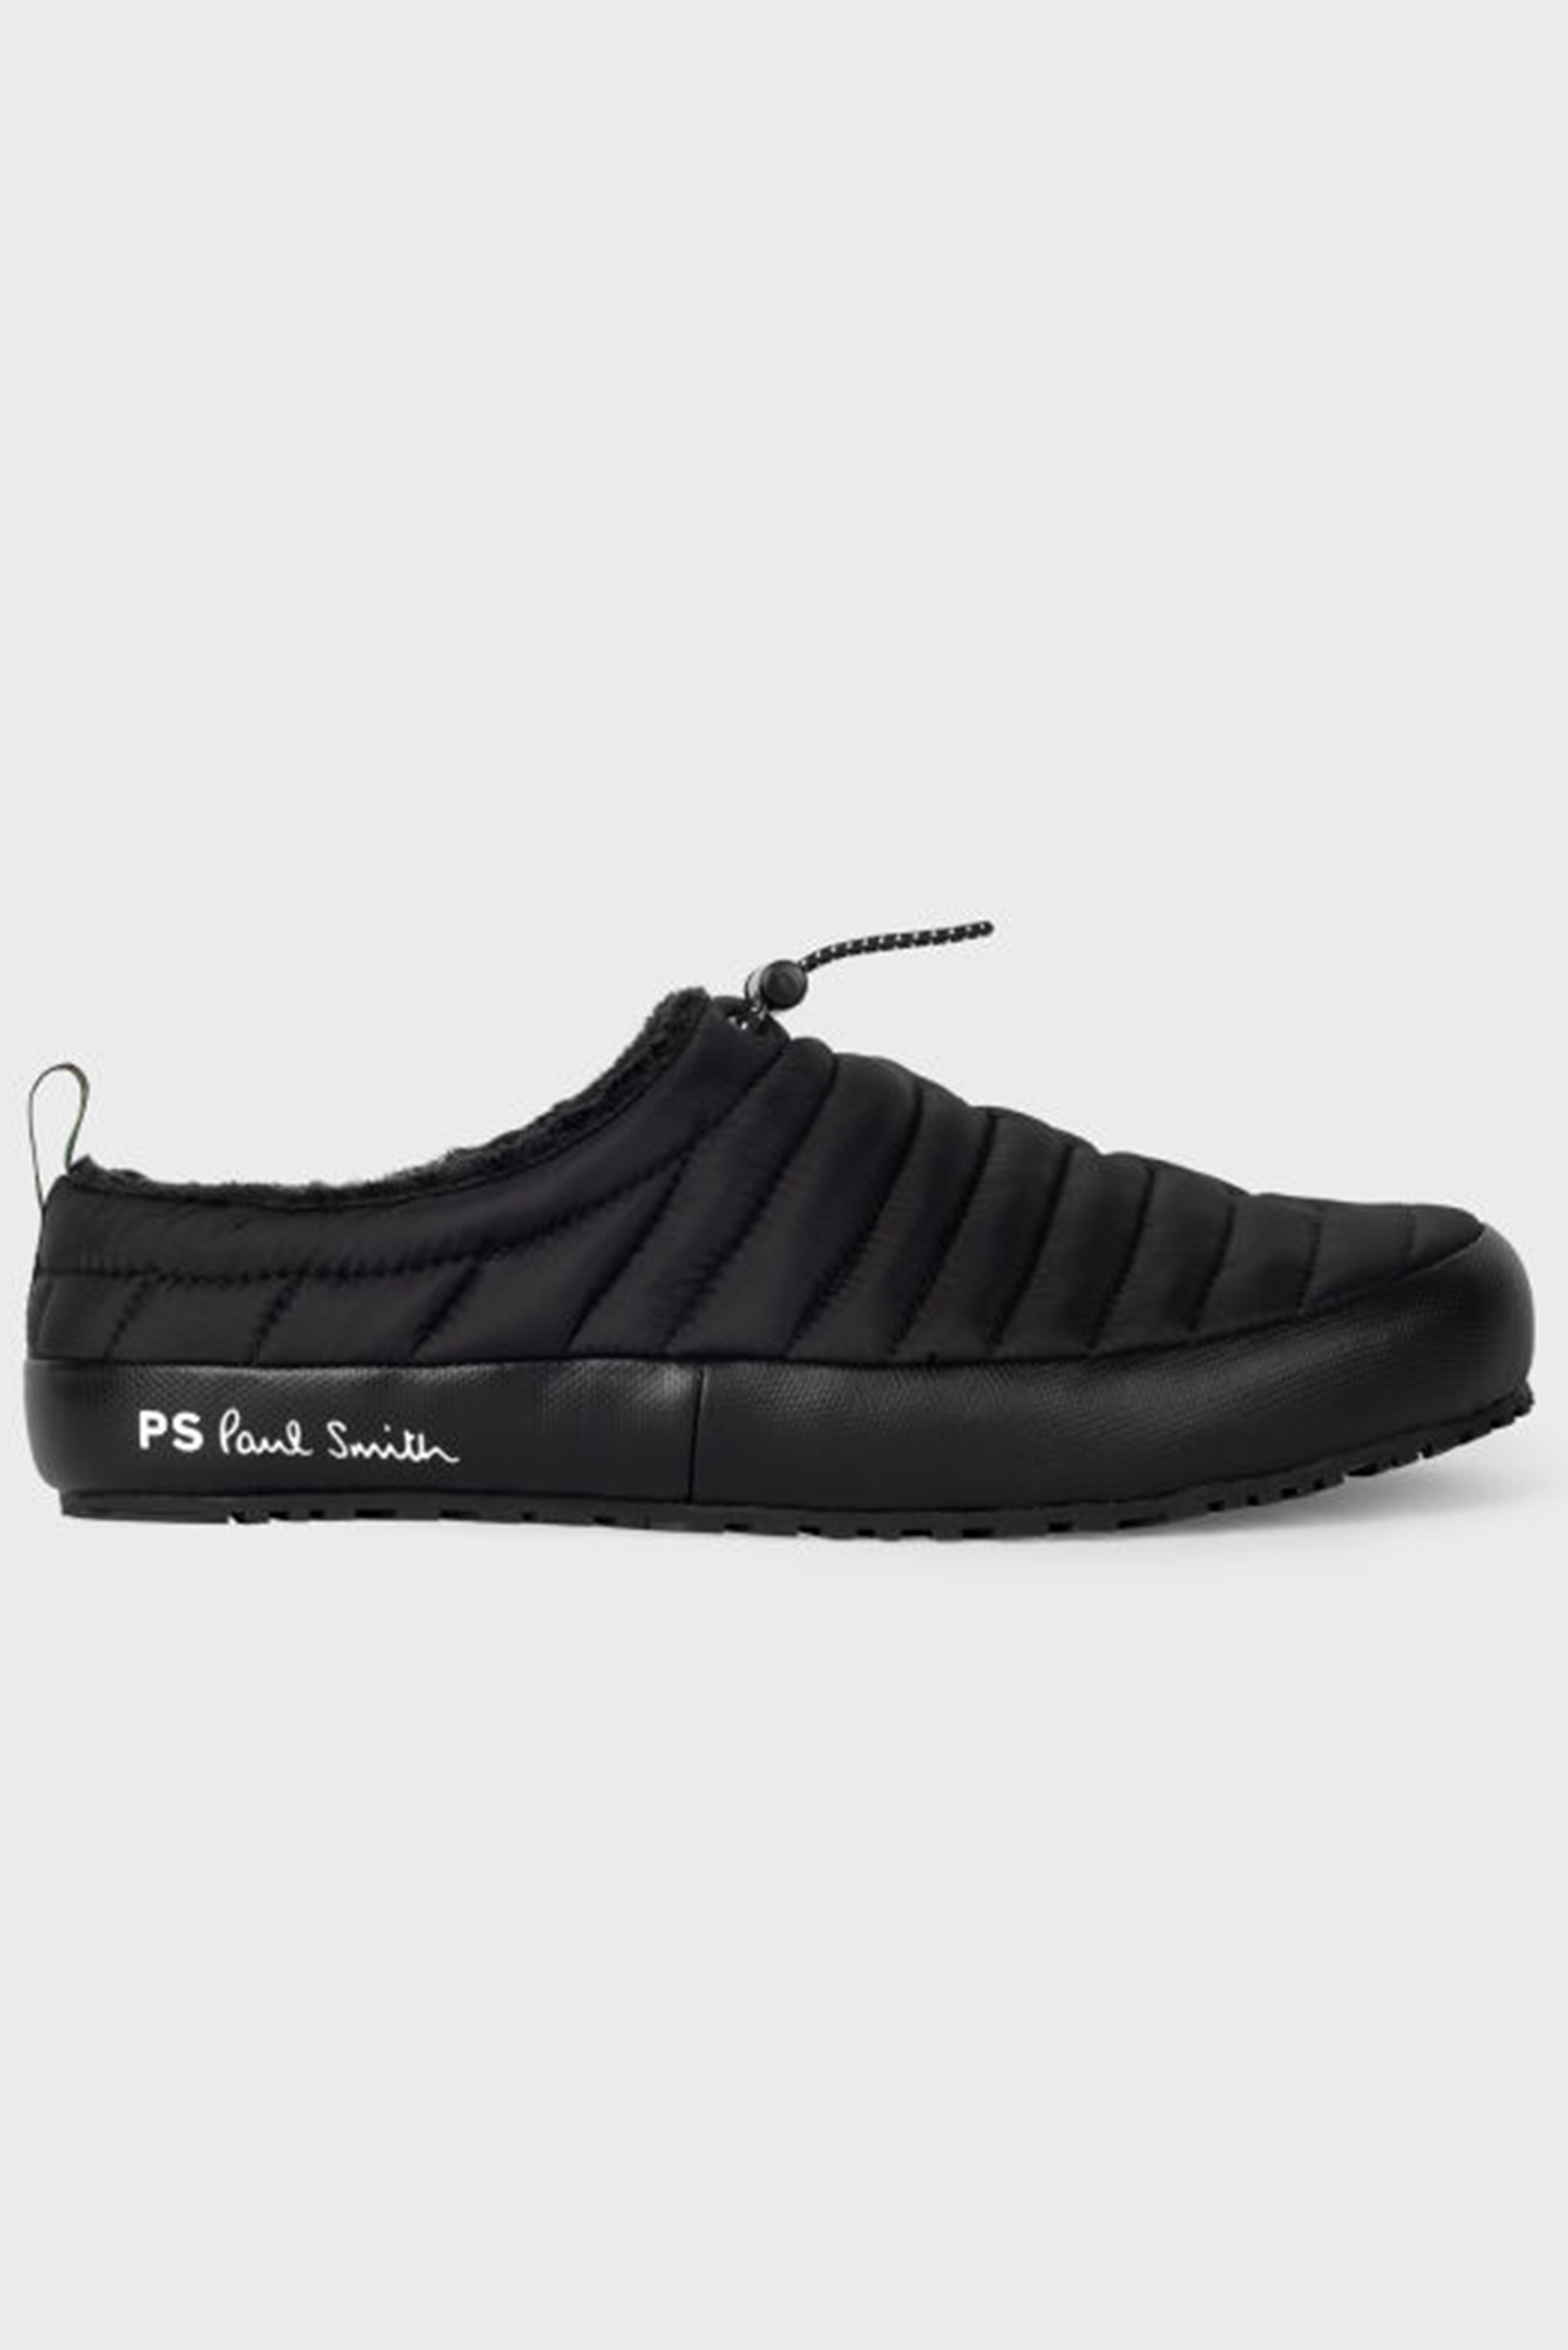 PAUL SMITH Ripstop Nylon Mule Slippers Larsen | Slipper | Lace-up Shoes &  Slippers | Shoes | Men | mientus Online Store